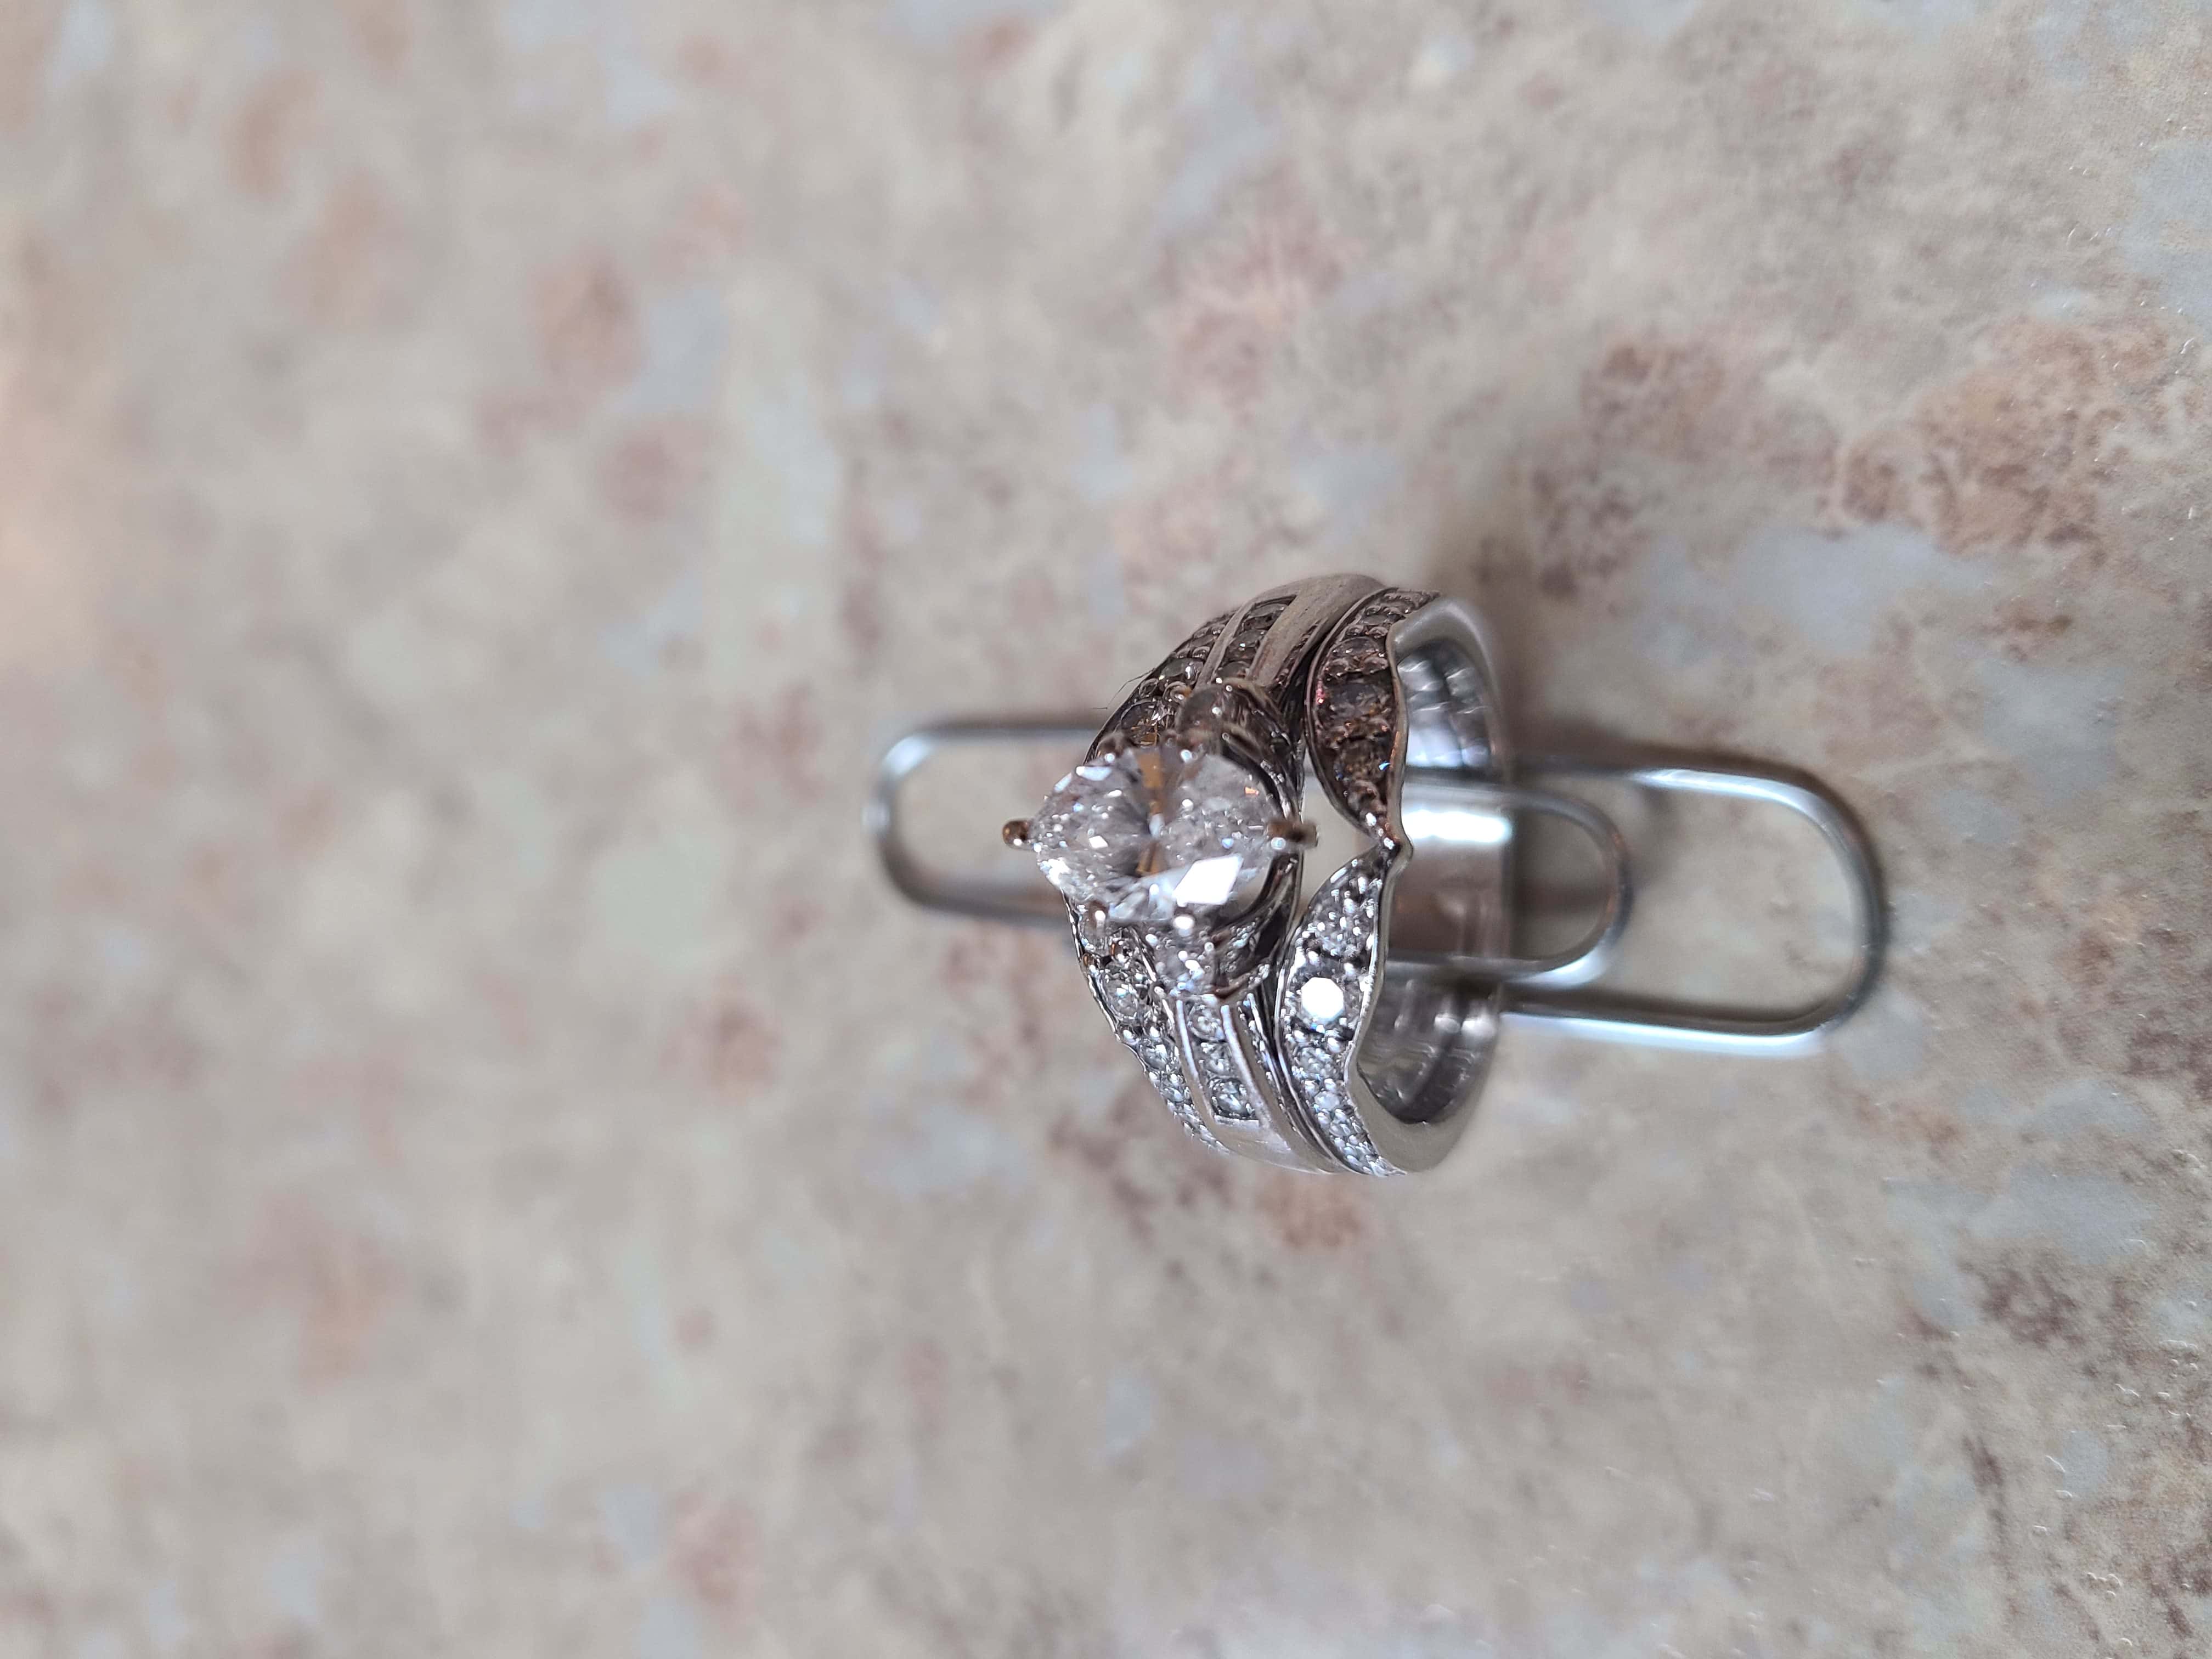 Marquis Shaped Diamond Ring Set in White Gold Held on Paper Clip with Countertop Texture in Background